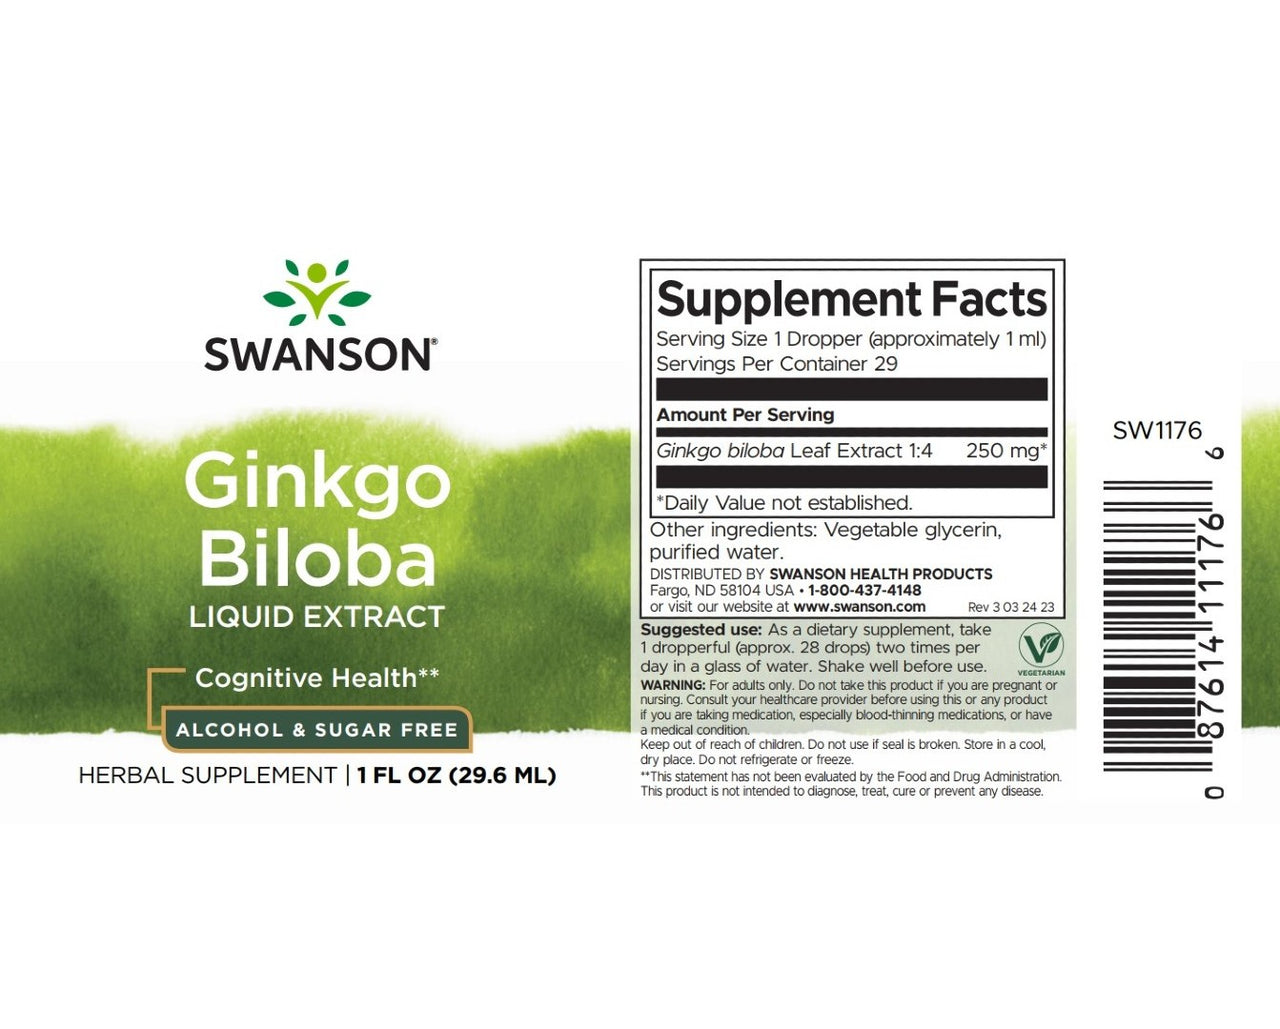 The label of Swanson's Ginkgo Biloba Liquid Extract 250 mg 1 fl oz (29.6 ml) highlights its alcohol and sugar-free formulation, promotes cognitive function, includes supplement facts for a 1 fl oz (29.6 ml) herbal supplement, and features antioxidant properties.